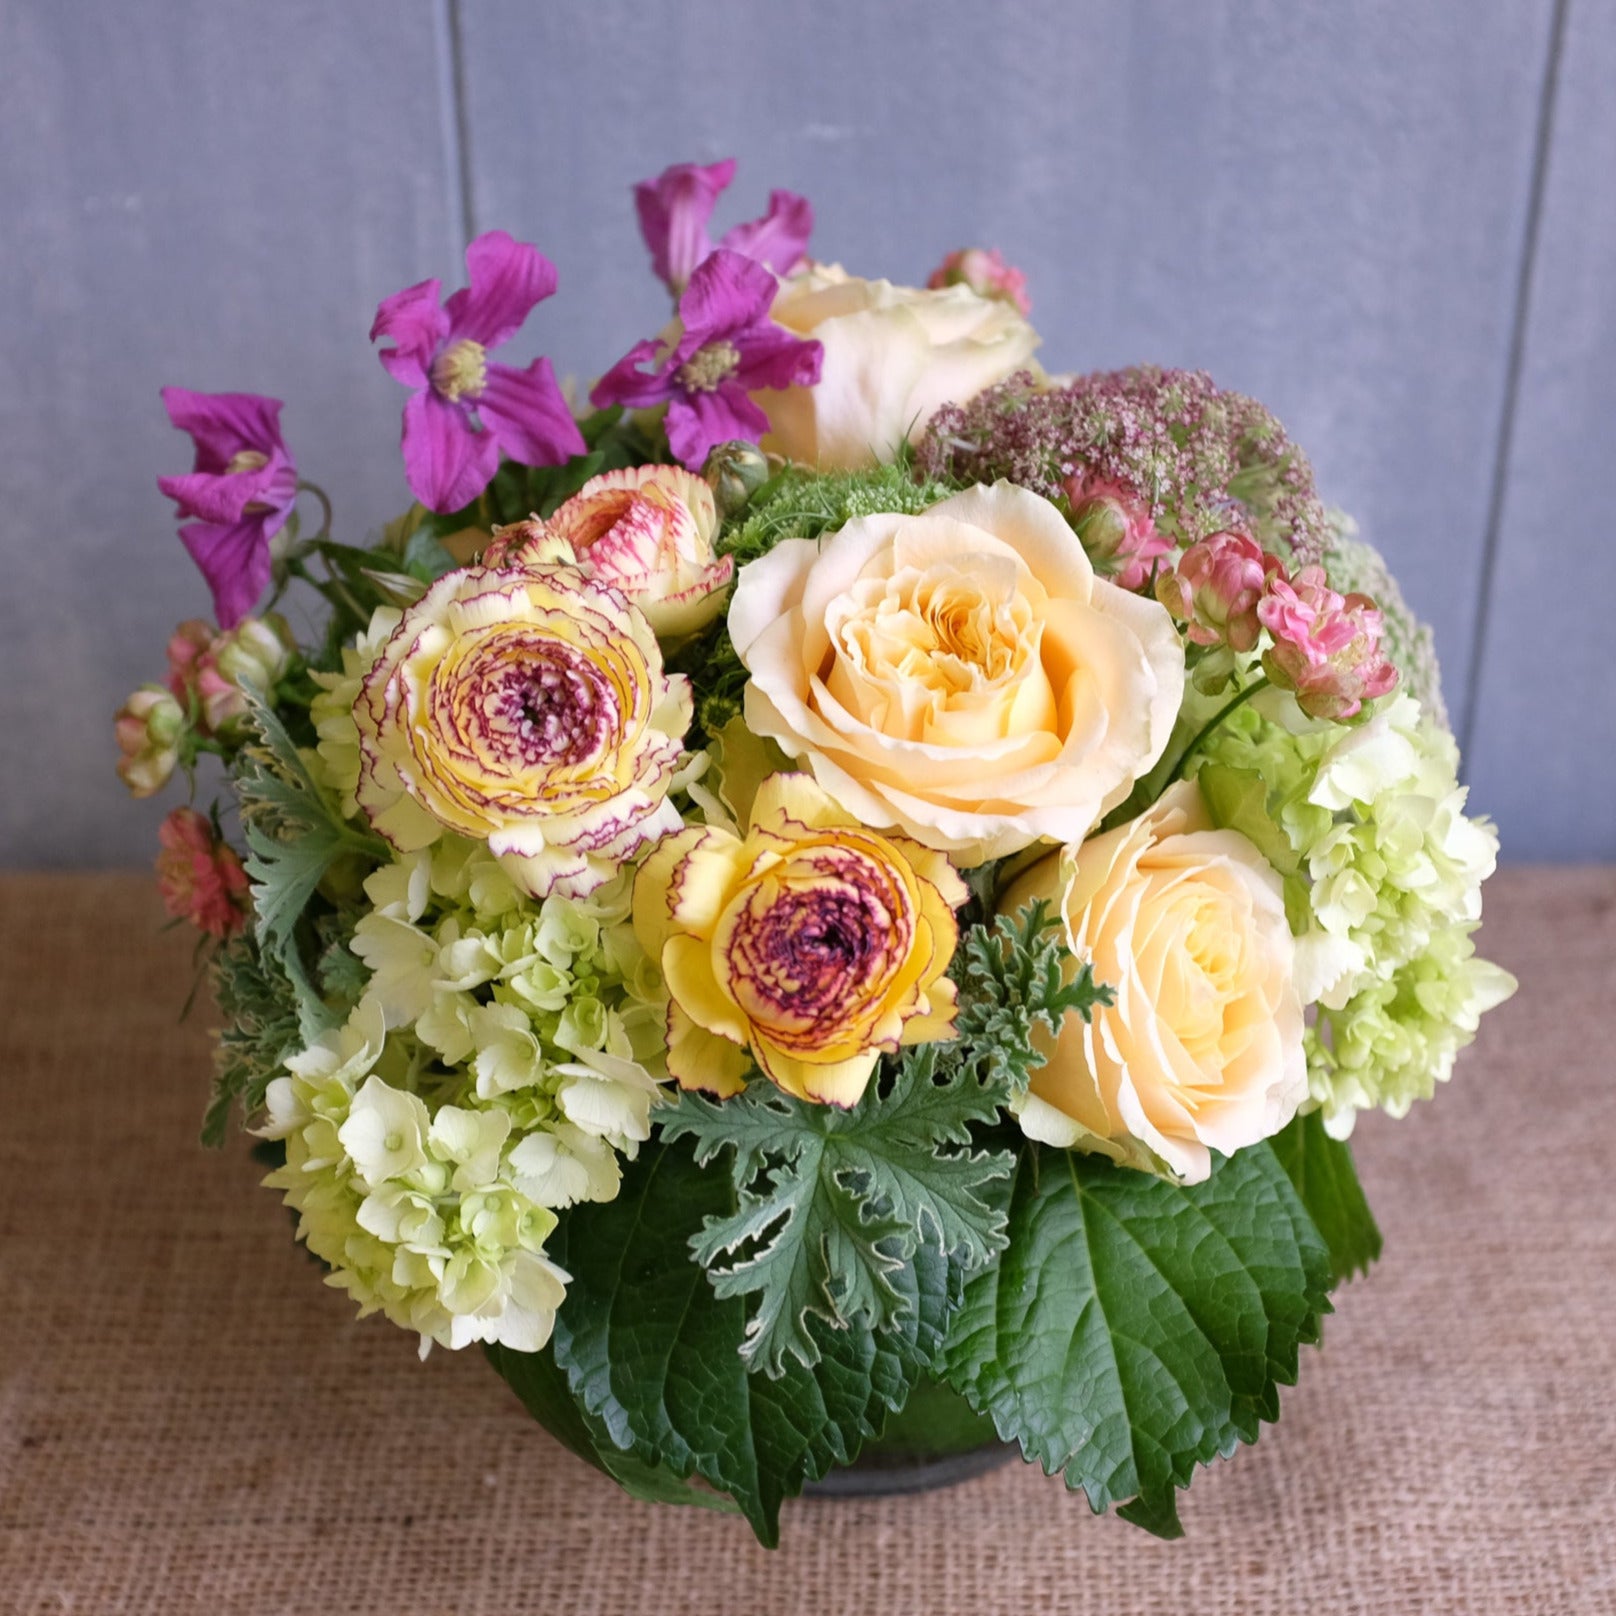 Isabelle flower arrangement with yellow roses and ranunculus in pastel colors